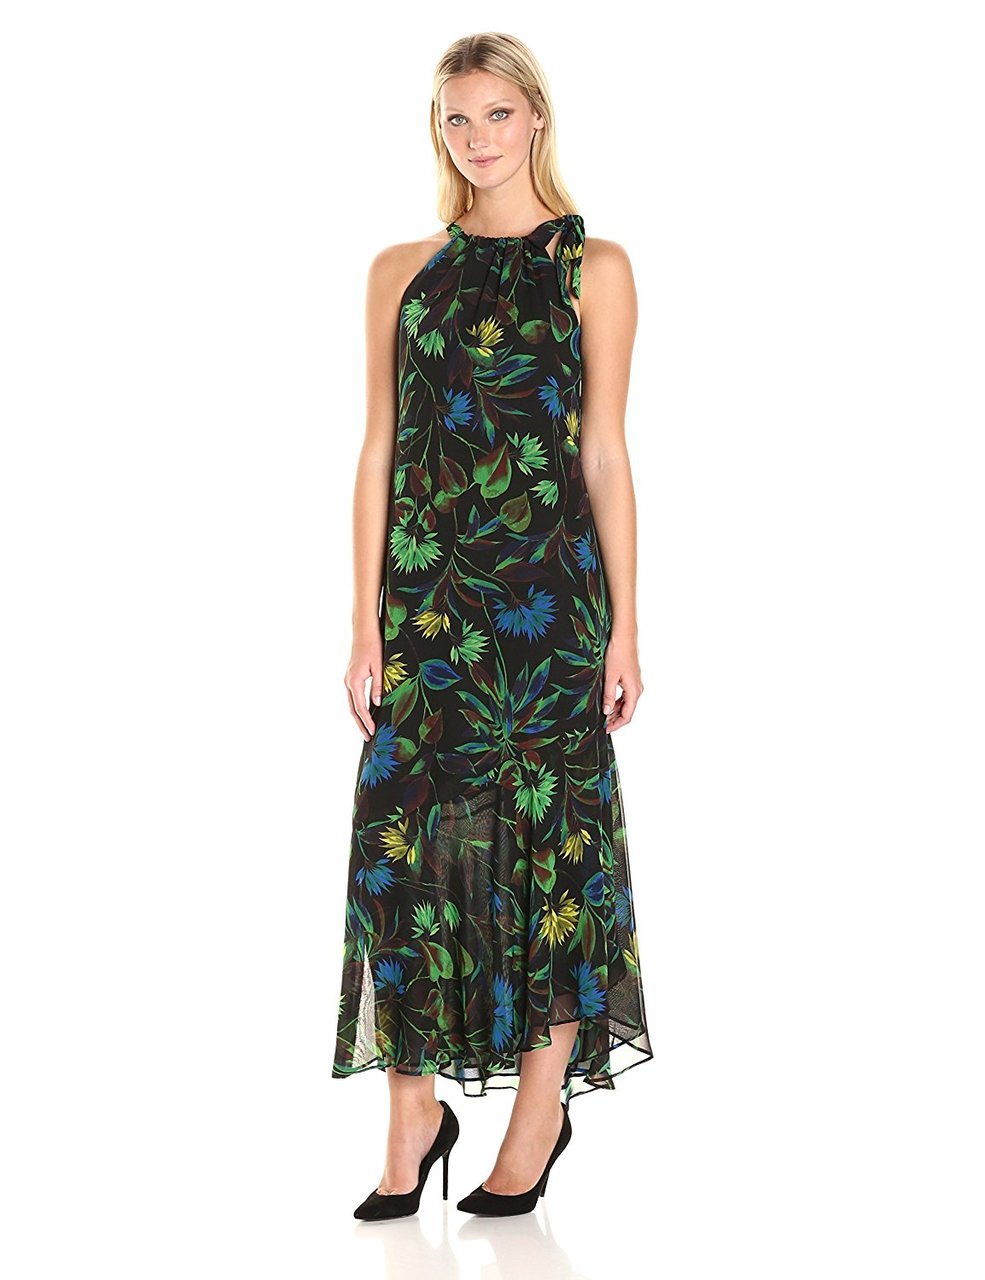 Taylor - Floral Printed Sheath Dress 8749M in Black and Multi-Color